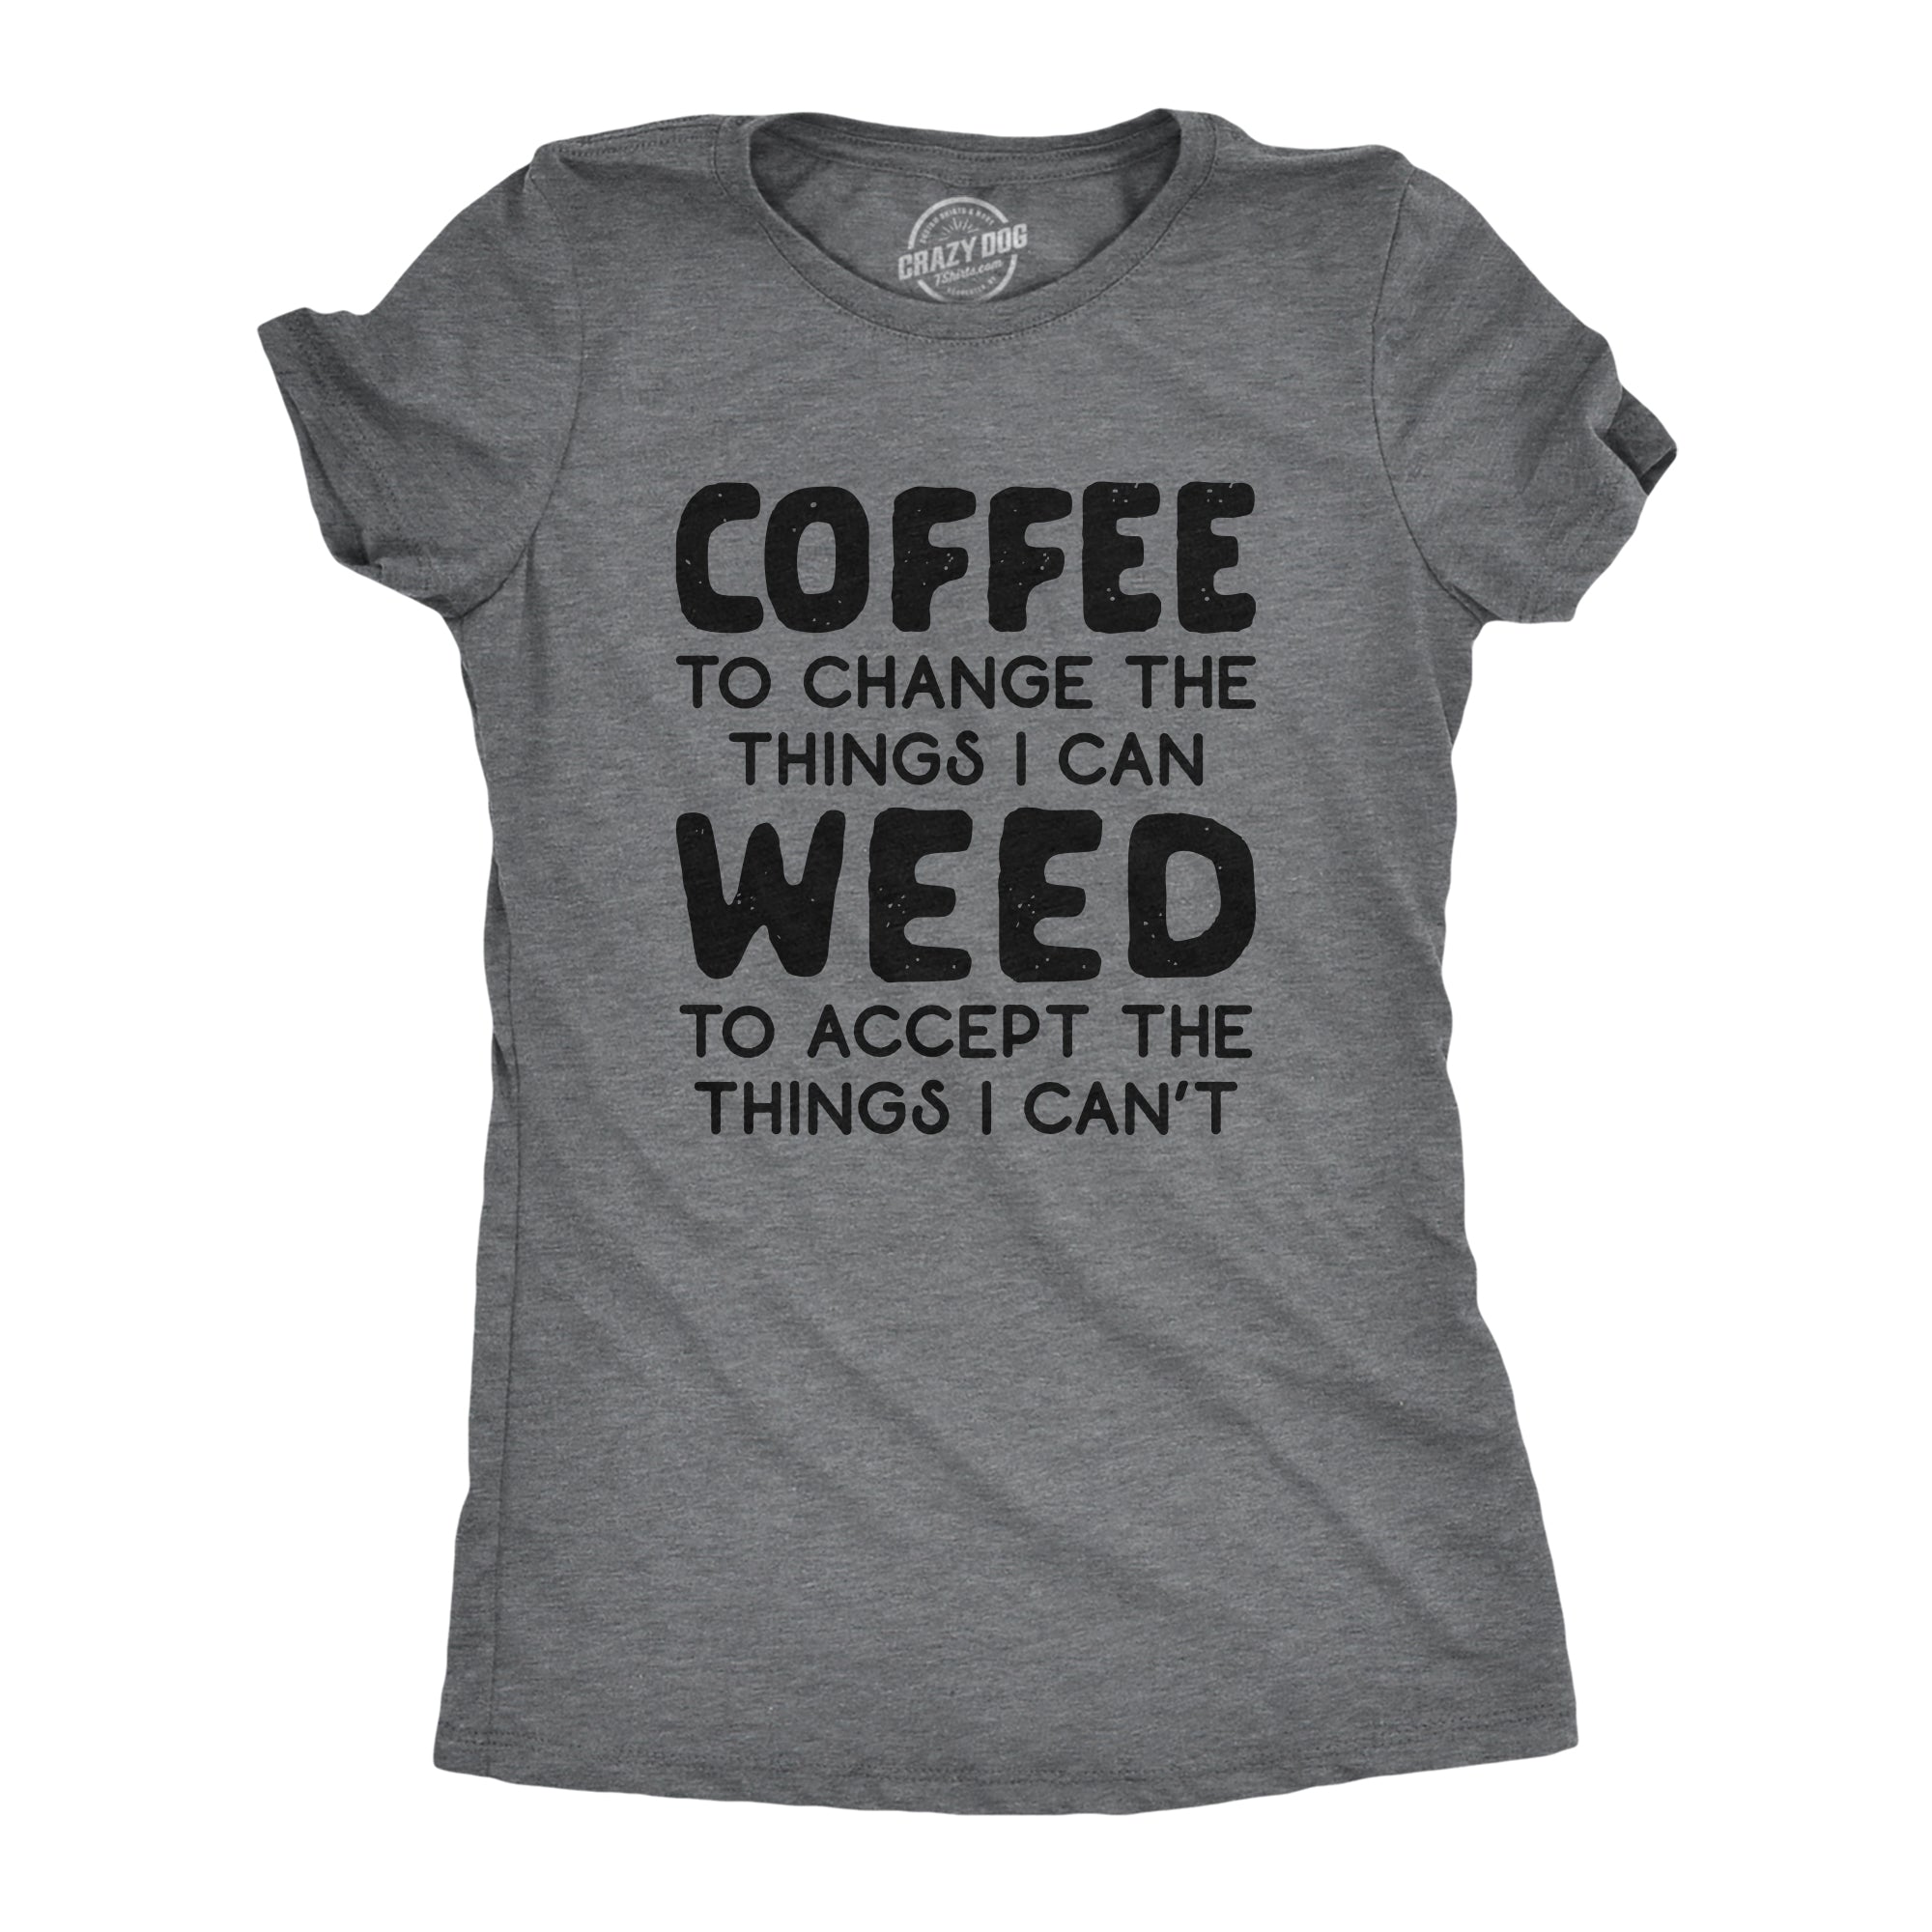 Funny Dark Heather Grey Coffee To Change The Things I Can Weed To Accept The Things I Can't Womens T Shirt Nerdy 420 Coffee Tee